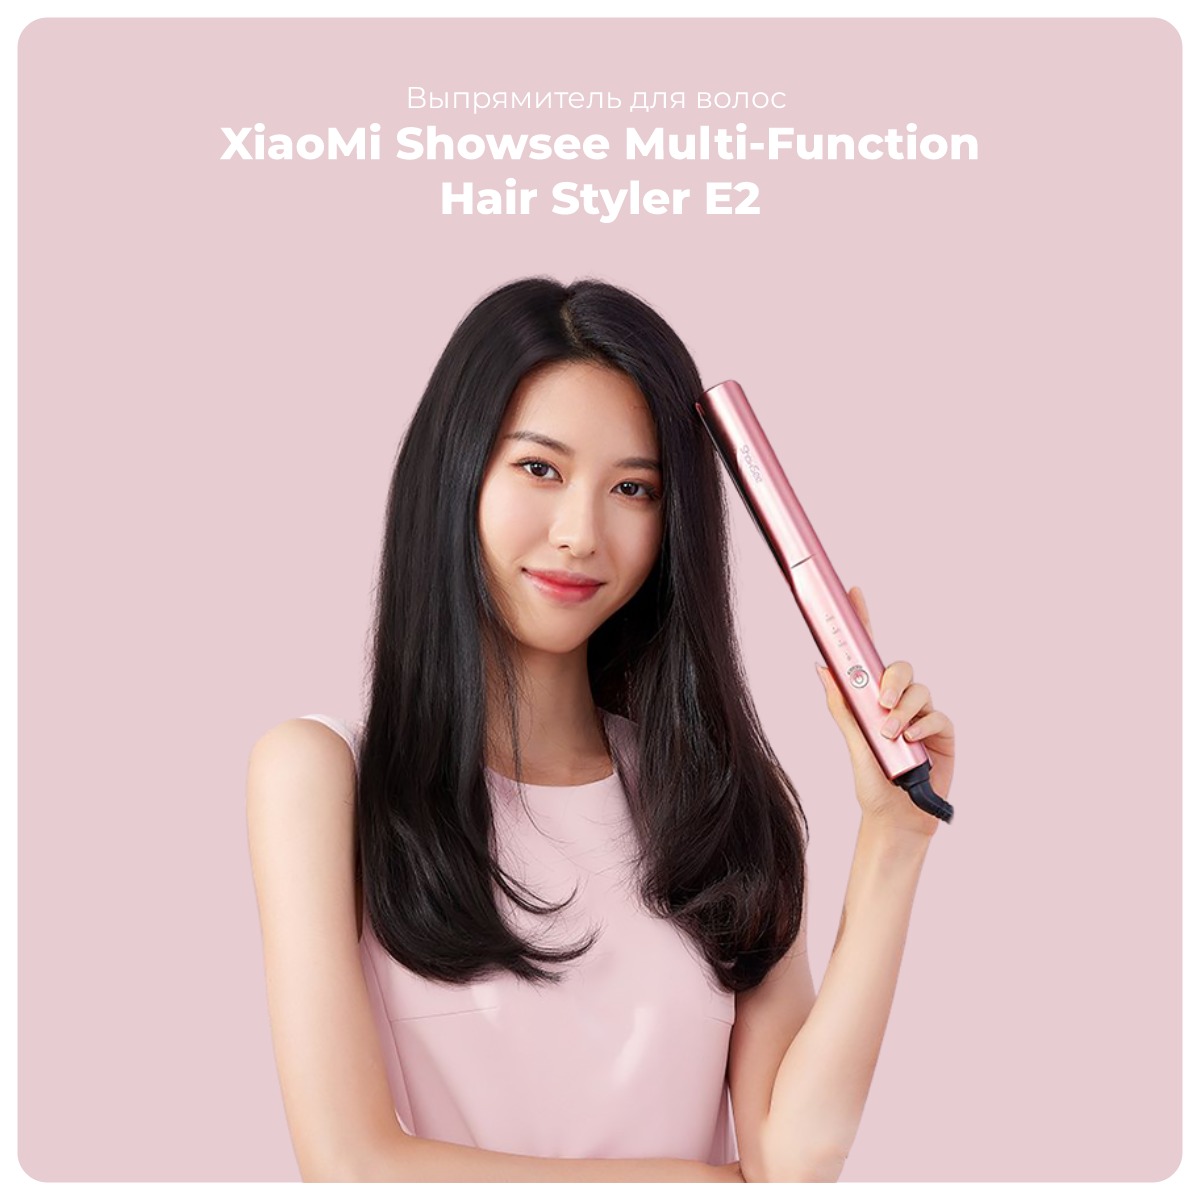 XiaoMi-Showsee-Multi-Function-Hair-Styler-E2-01